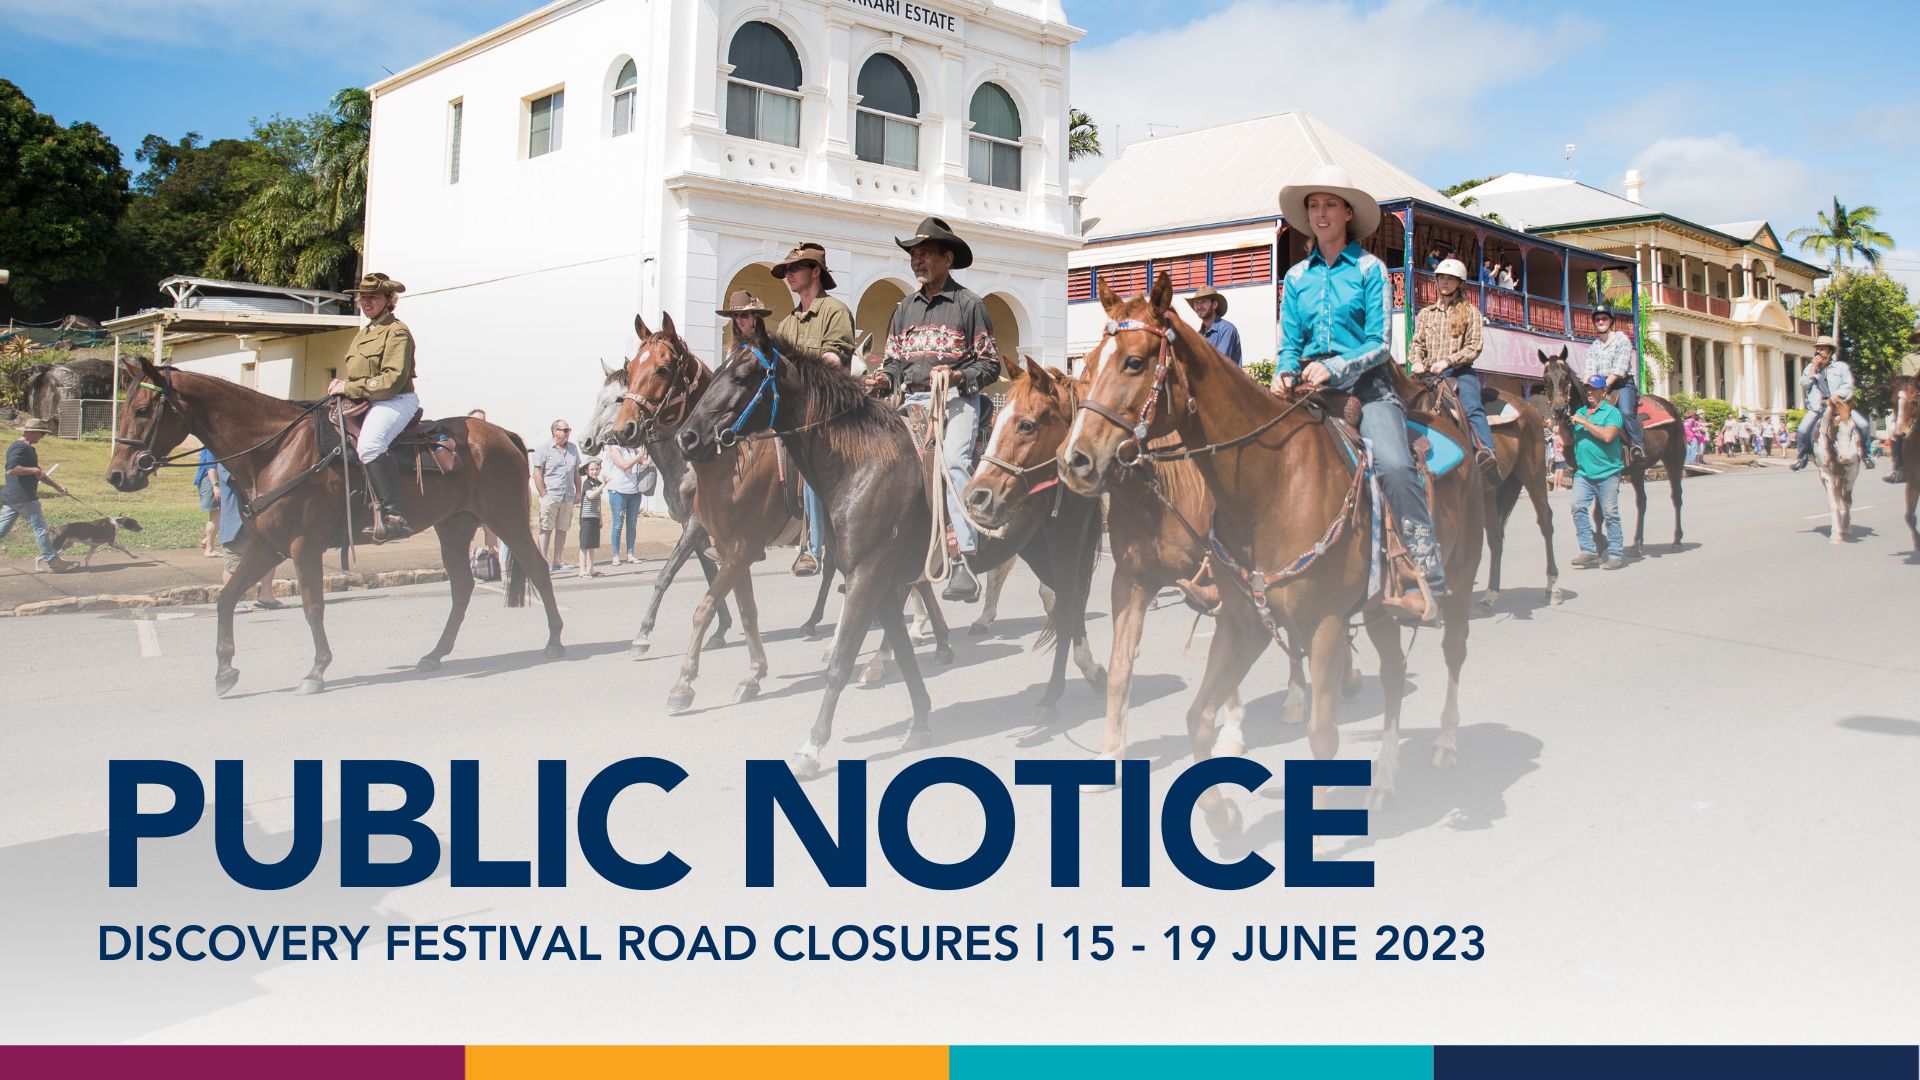 DISCOVERY FESTIVAL ROAD CLOSURES | JUNE 2023